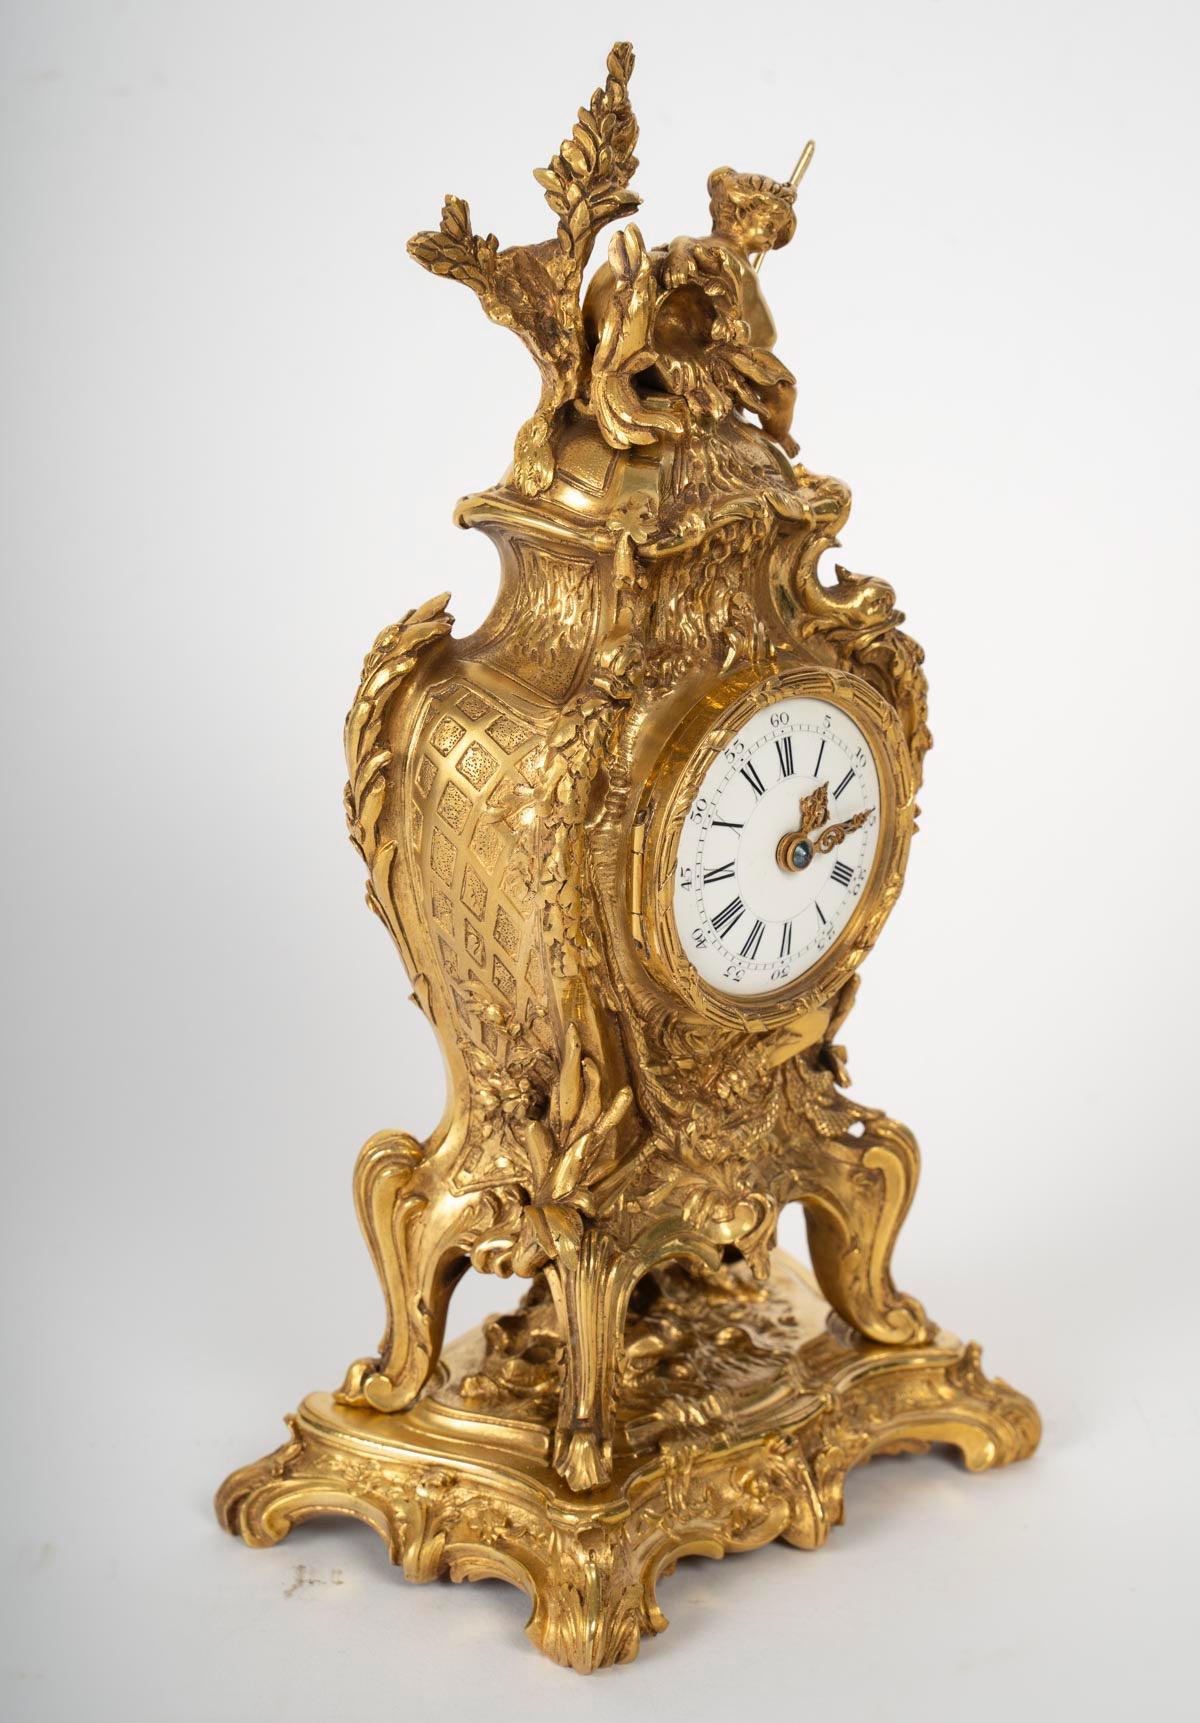 Attributed to Leon Messagé (1842-1901) and François Linke (1855-1946)
Gilt bronze clock surmounted by an allegory of the Source. 
With rocaille decoration, resting on four cambered legs, gilt bronze terrace.
Rich repertoire of rocailles 
White